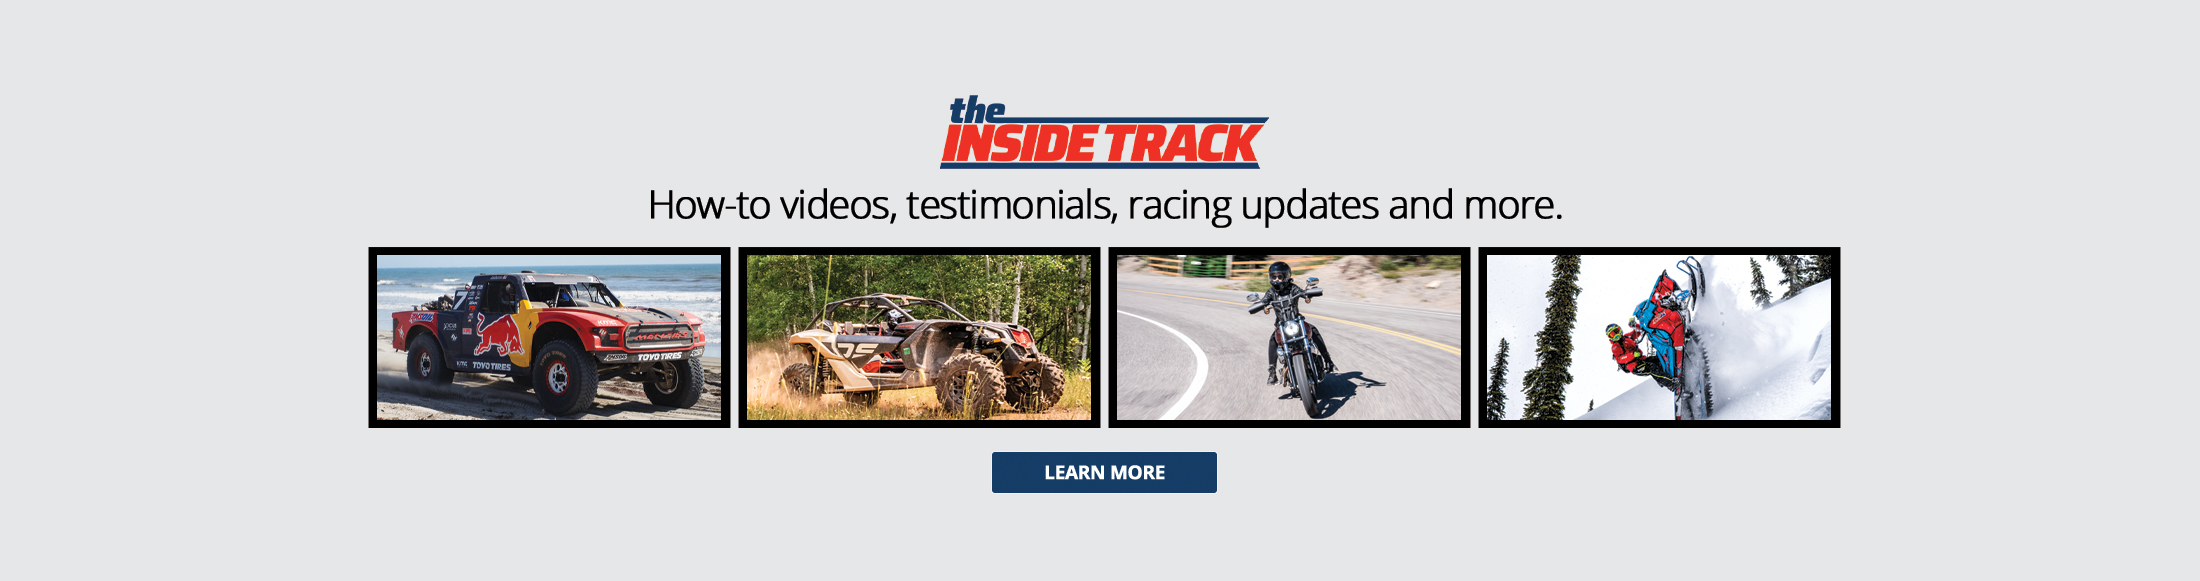 How-to Videos, testimonials, racing updates and more.